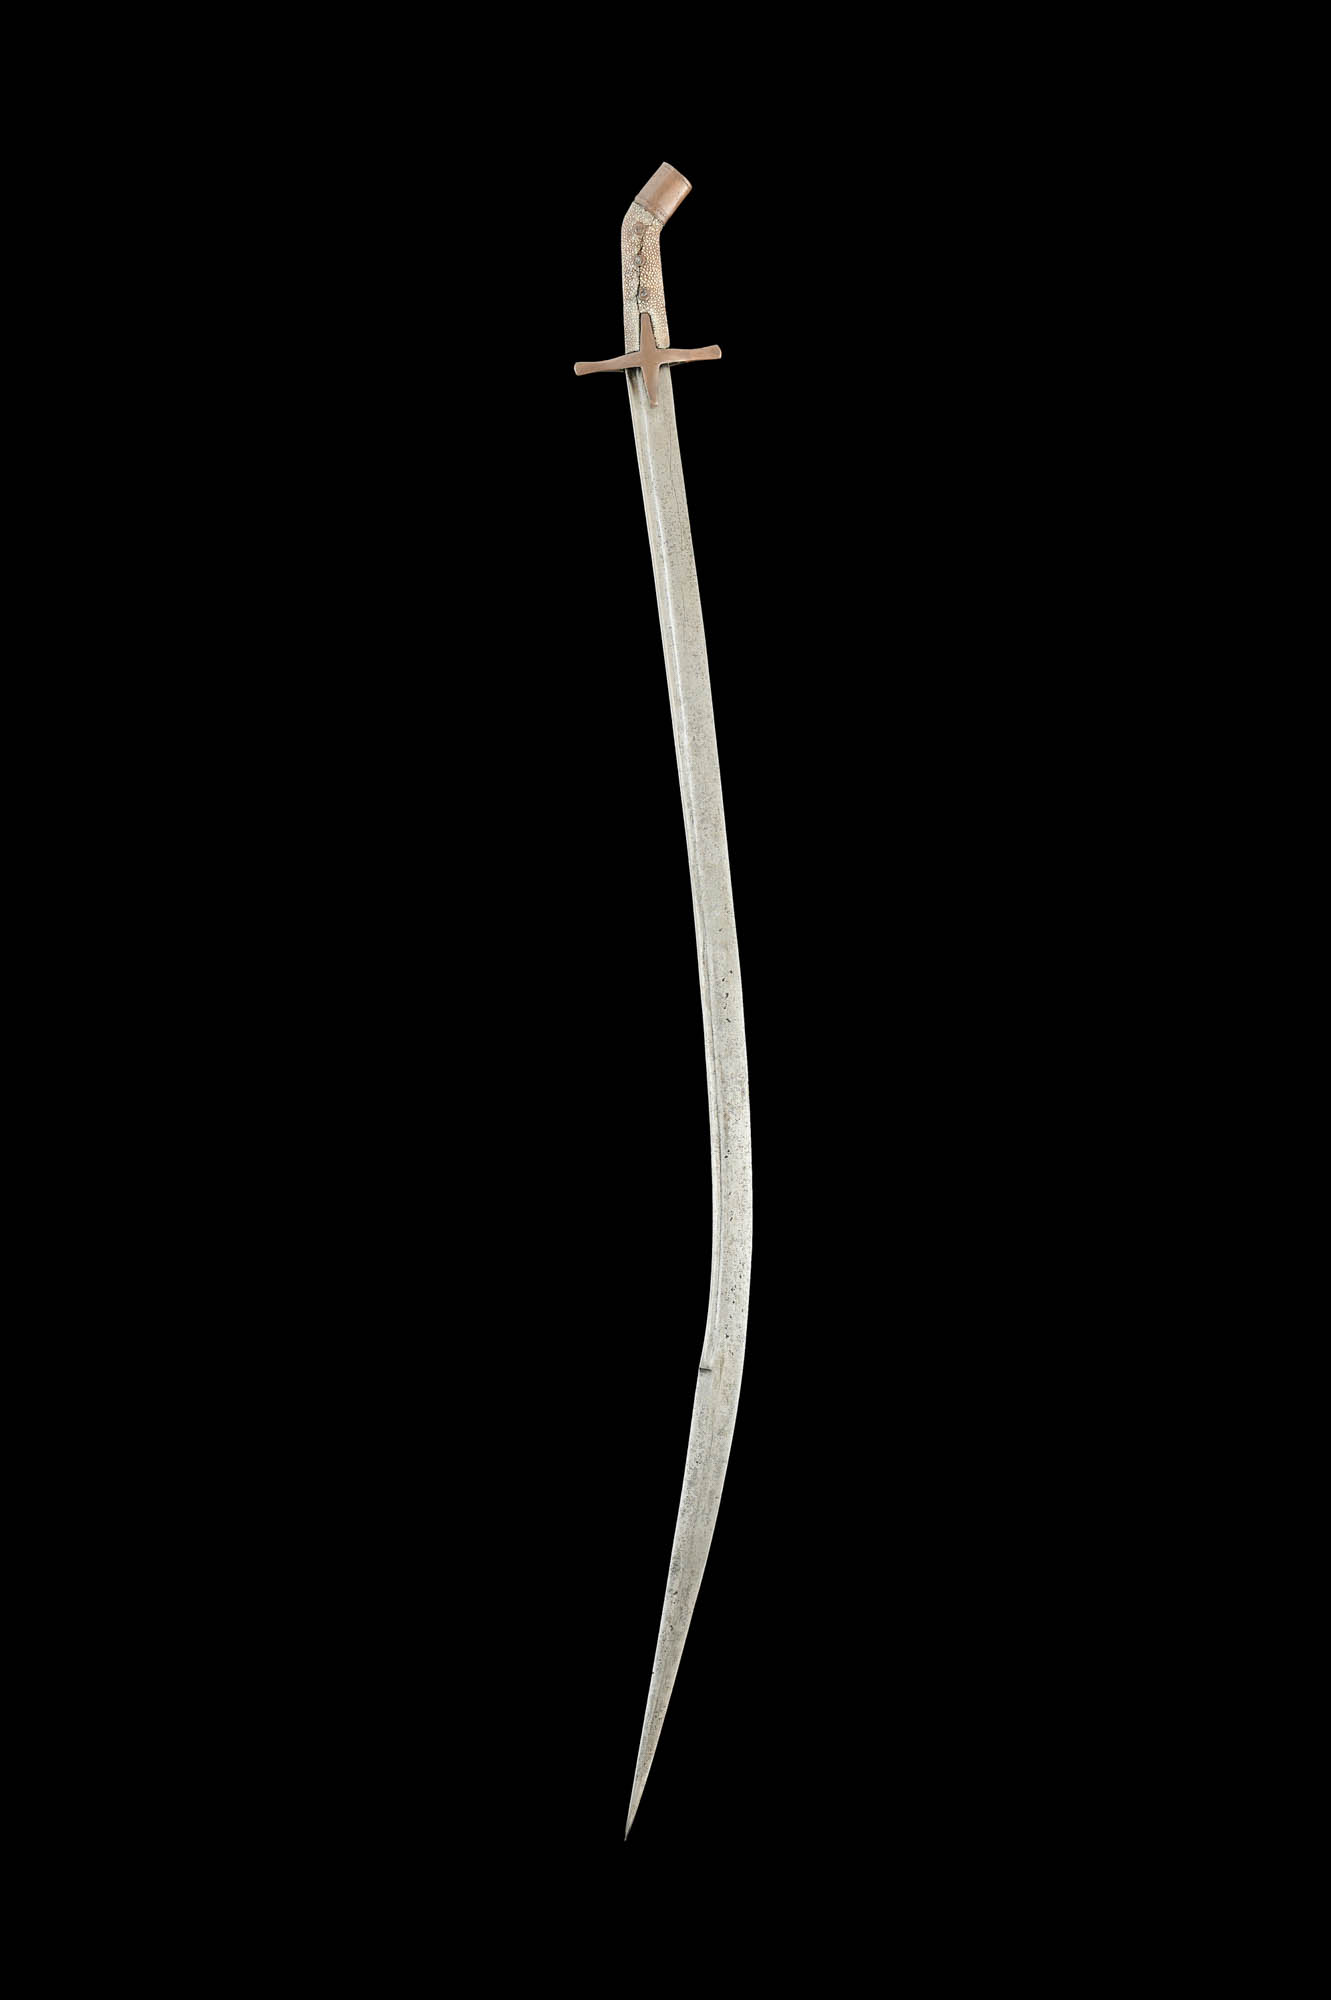 TATAR SABER SWORD DECORATED WITH RHOMBS - Image 11 of 21